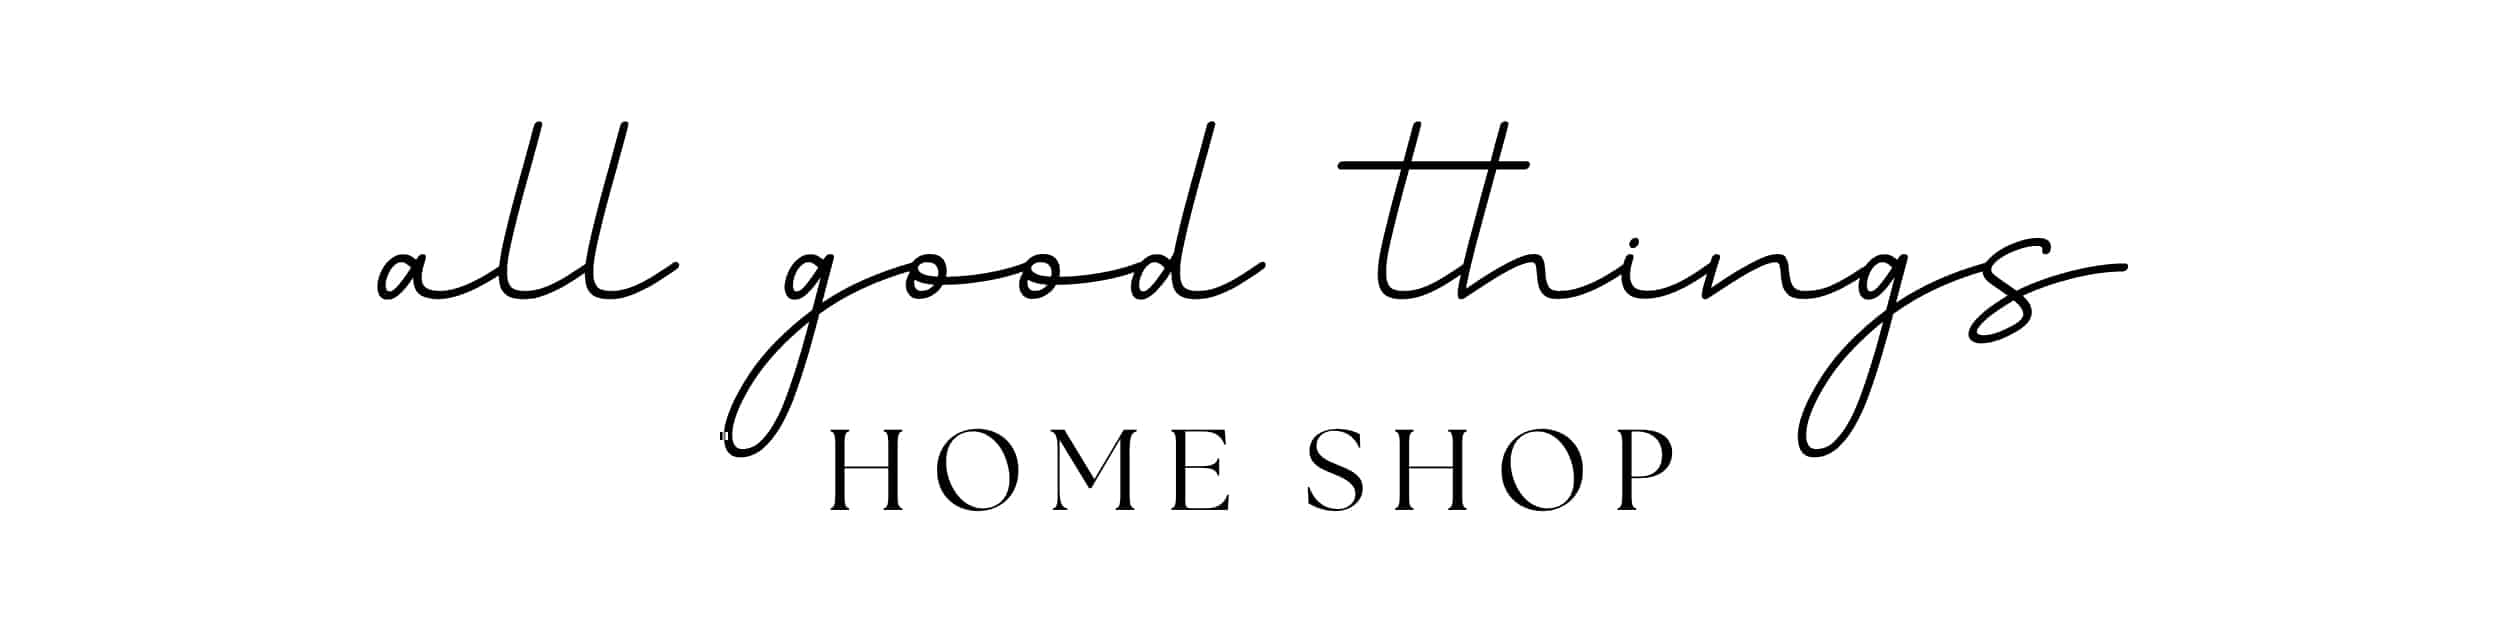 Pillows and Throws: All Good Things Home Shop